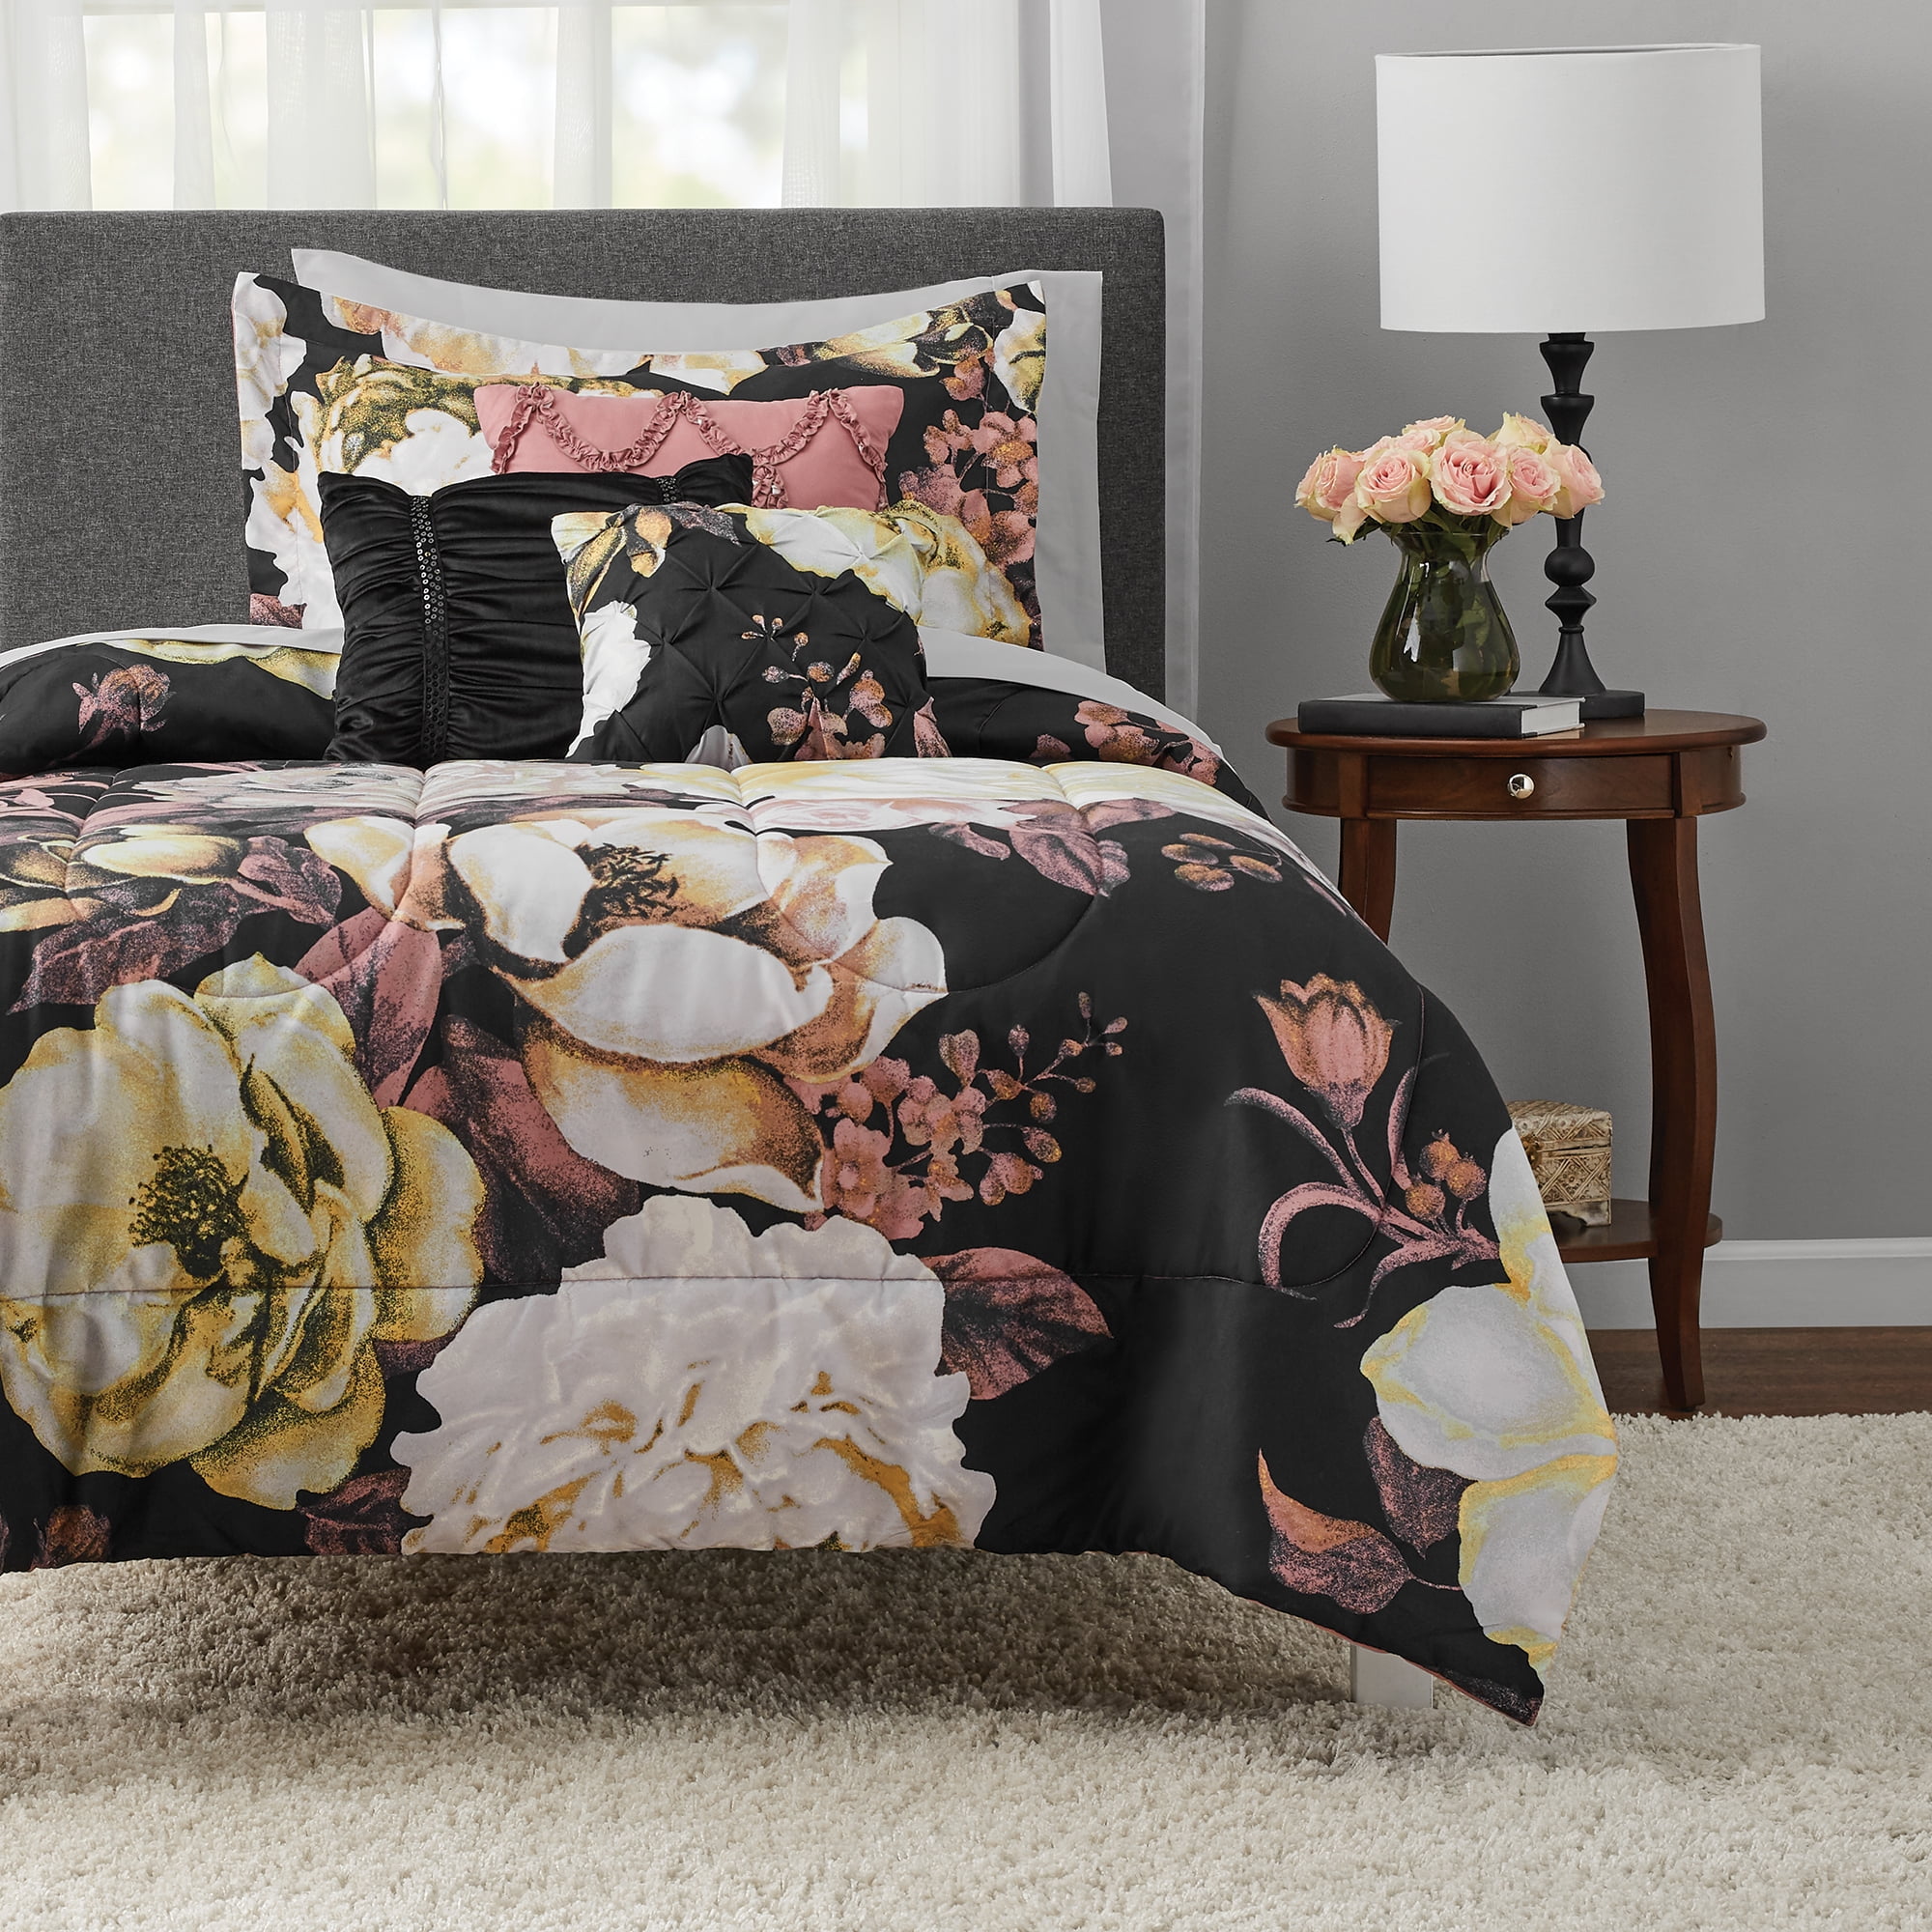 New Full Gray White Floral Bed In A Bag Comforter Bedding Sheets Pillowcase Set 